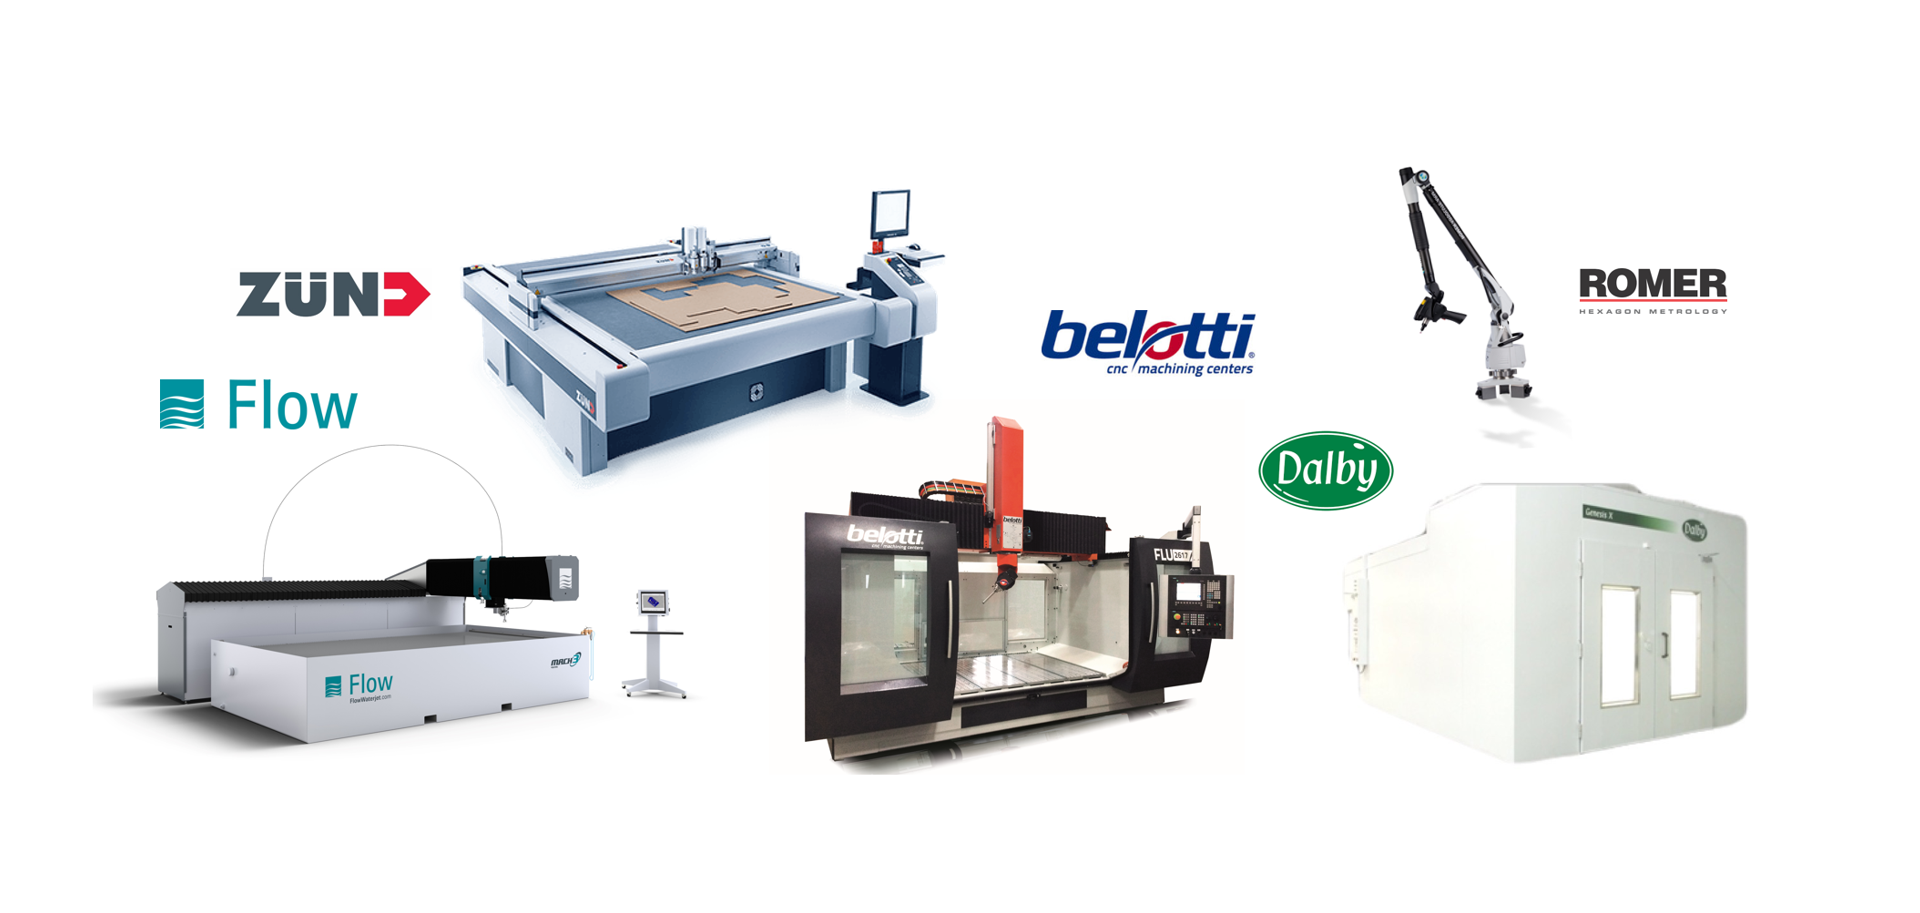 Specialist in-house equipment. Zund Fabric Cutter, Flow Waterjet Cutter, Belotti 5 Axis CNC, ROMER Control Arm, Dalby Genesis X Spray Booth / paint shop.